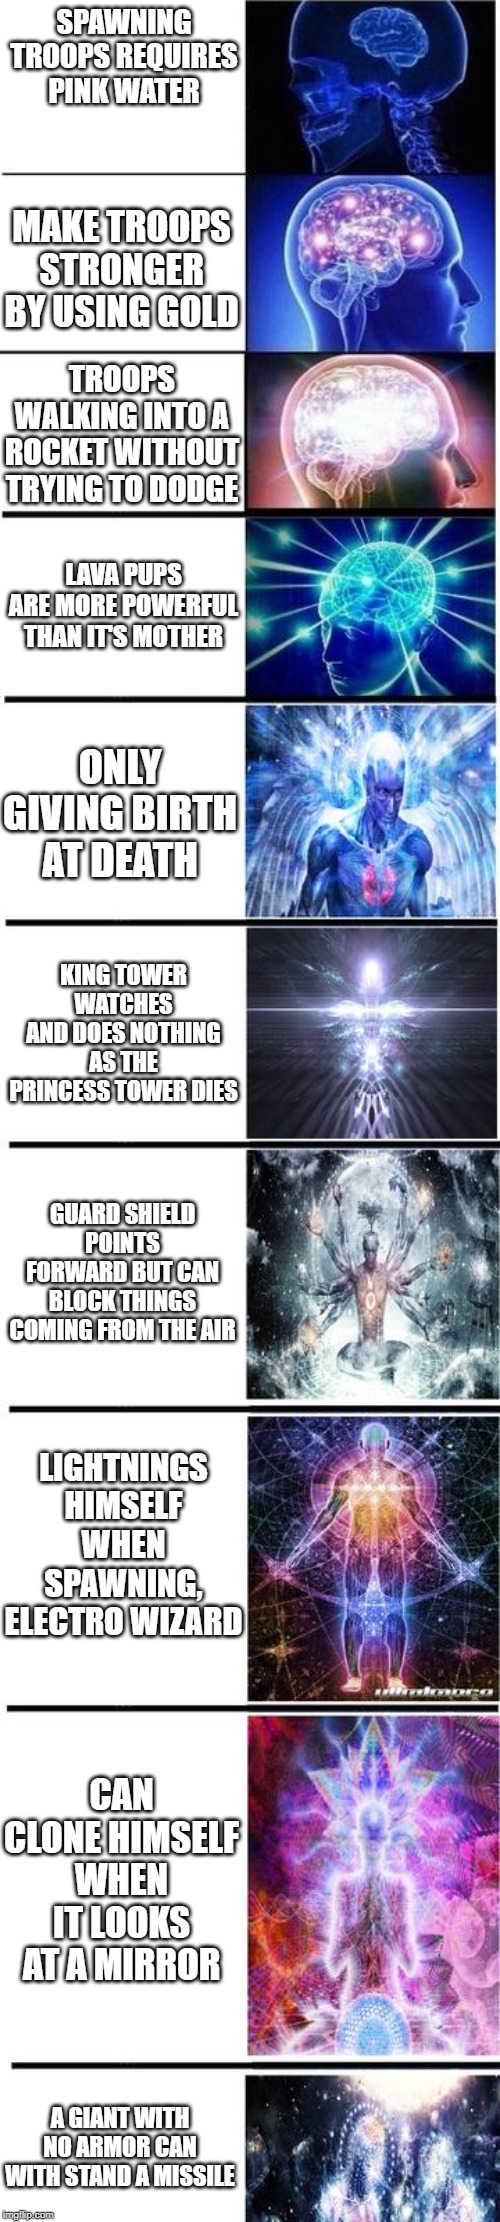 expanding brain | SPAWNING TROOPS REQUIRES PINK WATER; MAKE TROOPS STRONGER BY USING GOLD; TROOPS WALKING INTO A ROCKET WITHOUT TRYING TO DODGE; LAVA PUPS ARE MORE POWERFUL THAN IT'S MOTHER; ONLY GIVING BIRTH AT DEATH; KING TOWER WATCHES AND DOES NOTHING AS THE PRINCESS TOWER DIES; GUARD SHIELD POINTS FORWARD BUT CAN BLOCK THINGS COMING FROM THE AIR; LIGHTNINGS HIMSELF WHEN SPAWNING, ELECTRO WIZARD; CAN CLONE HIMSELF WHEN IT LOOKS AT A MIRROR; A GIANT WITH NO ARMOR CAN WITH STAND A MISSILE | image tagged in expanding brain | made w/ Imgflip meme maker